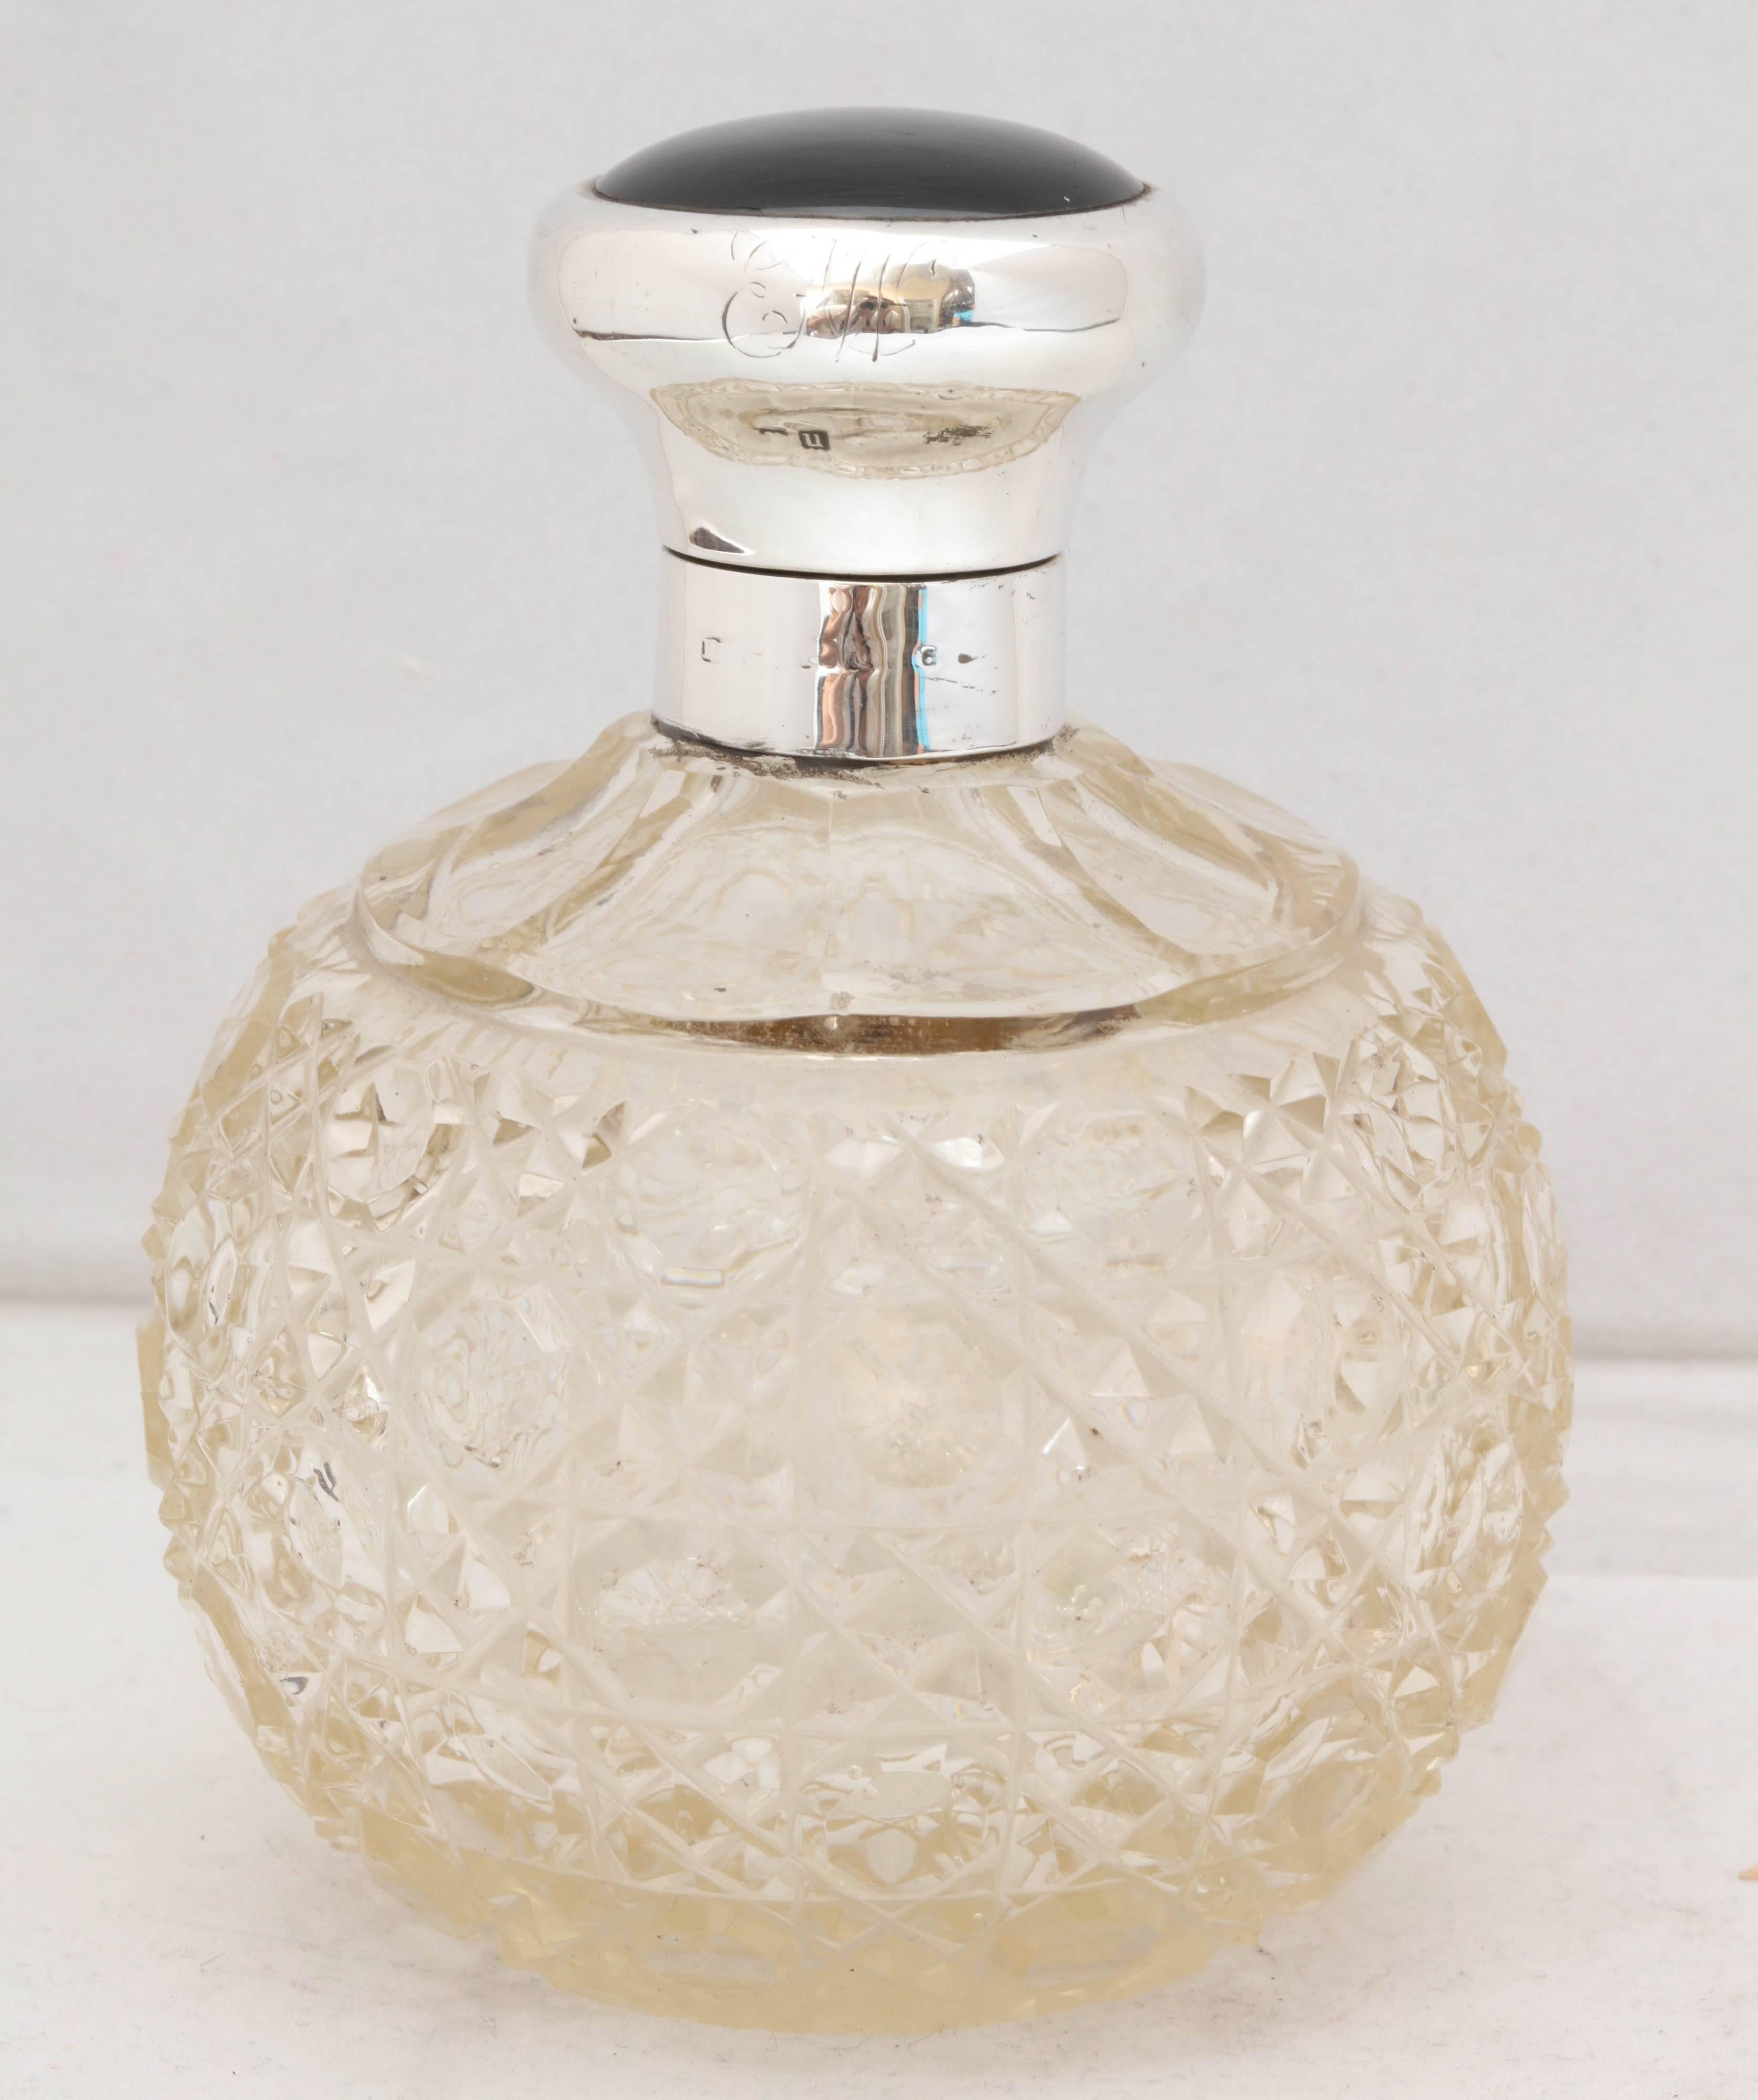 Edwardian, sterling silver and onyx-mounted, hobnail cut crystal perfume bottle, Birmingham, England, 1920, H Matthews - maker. Barely readable monogram on edge of lid. Measures: 4 3/4